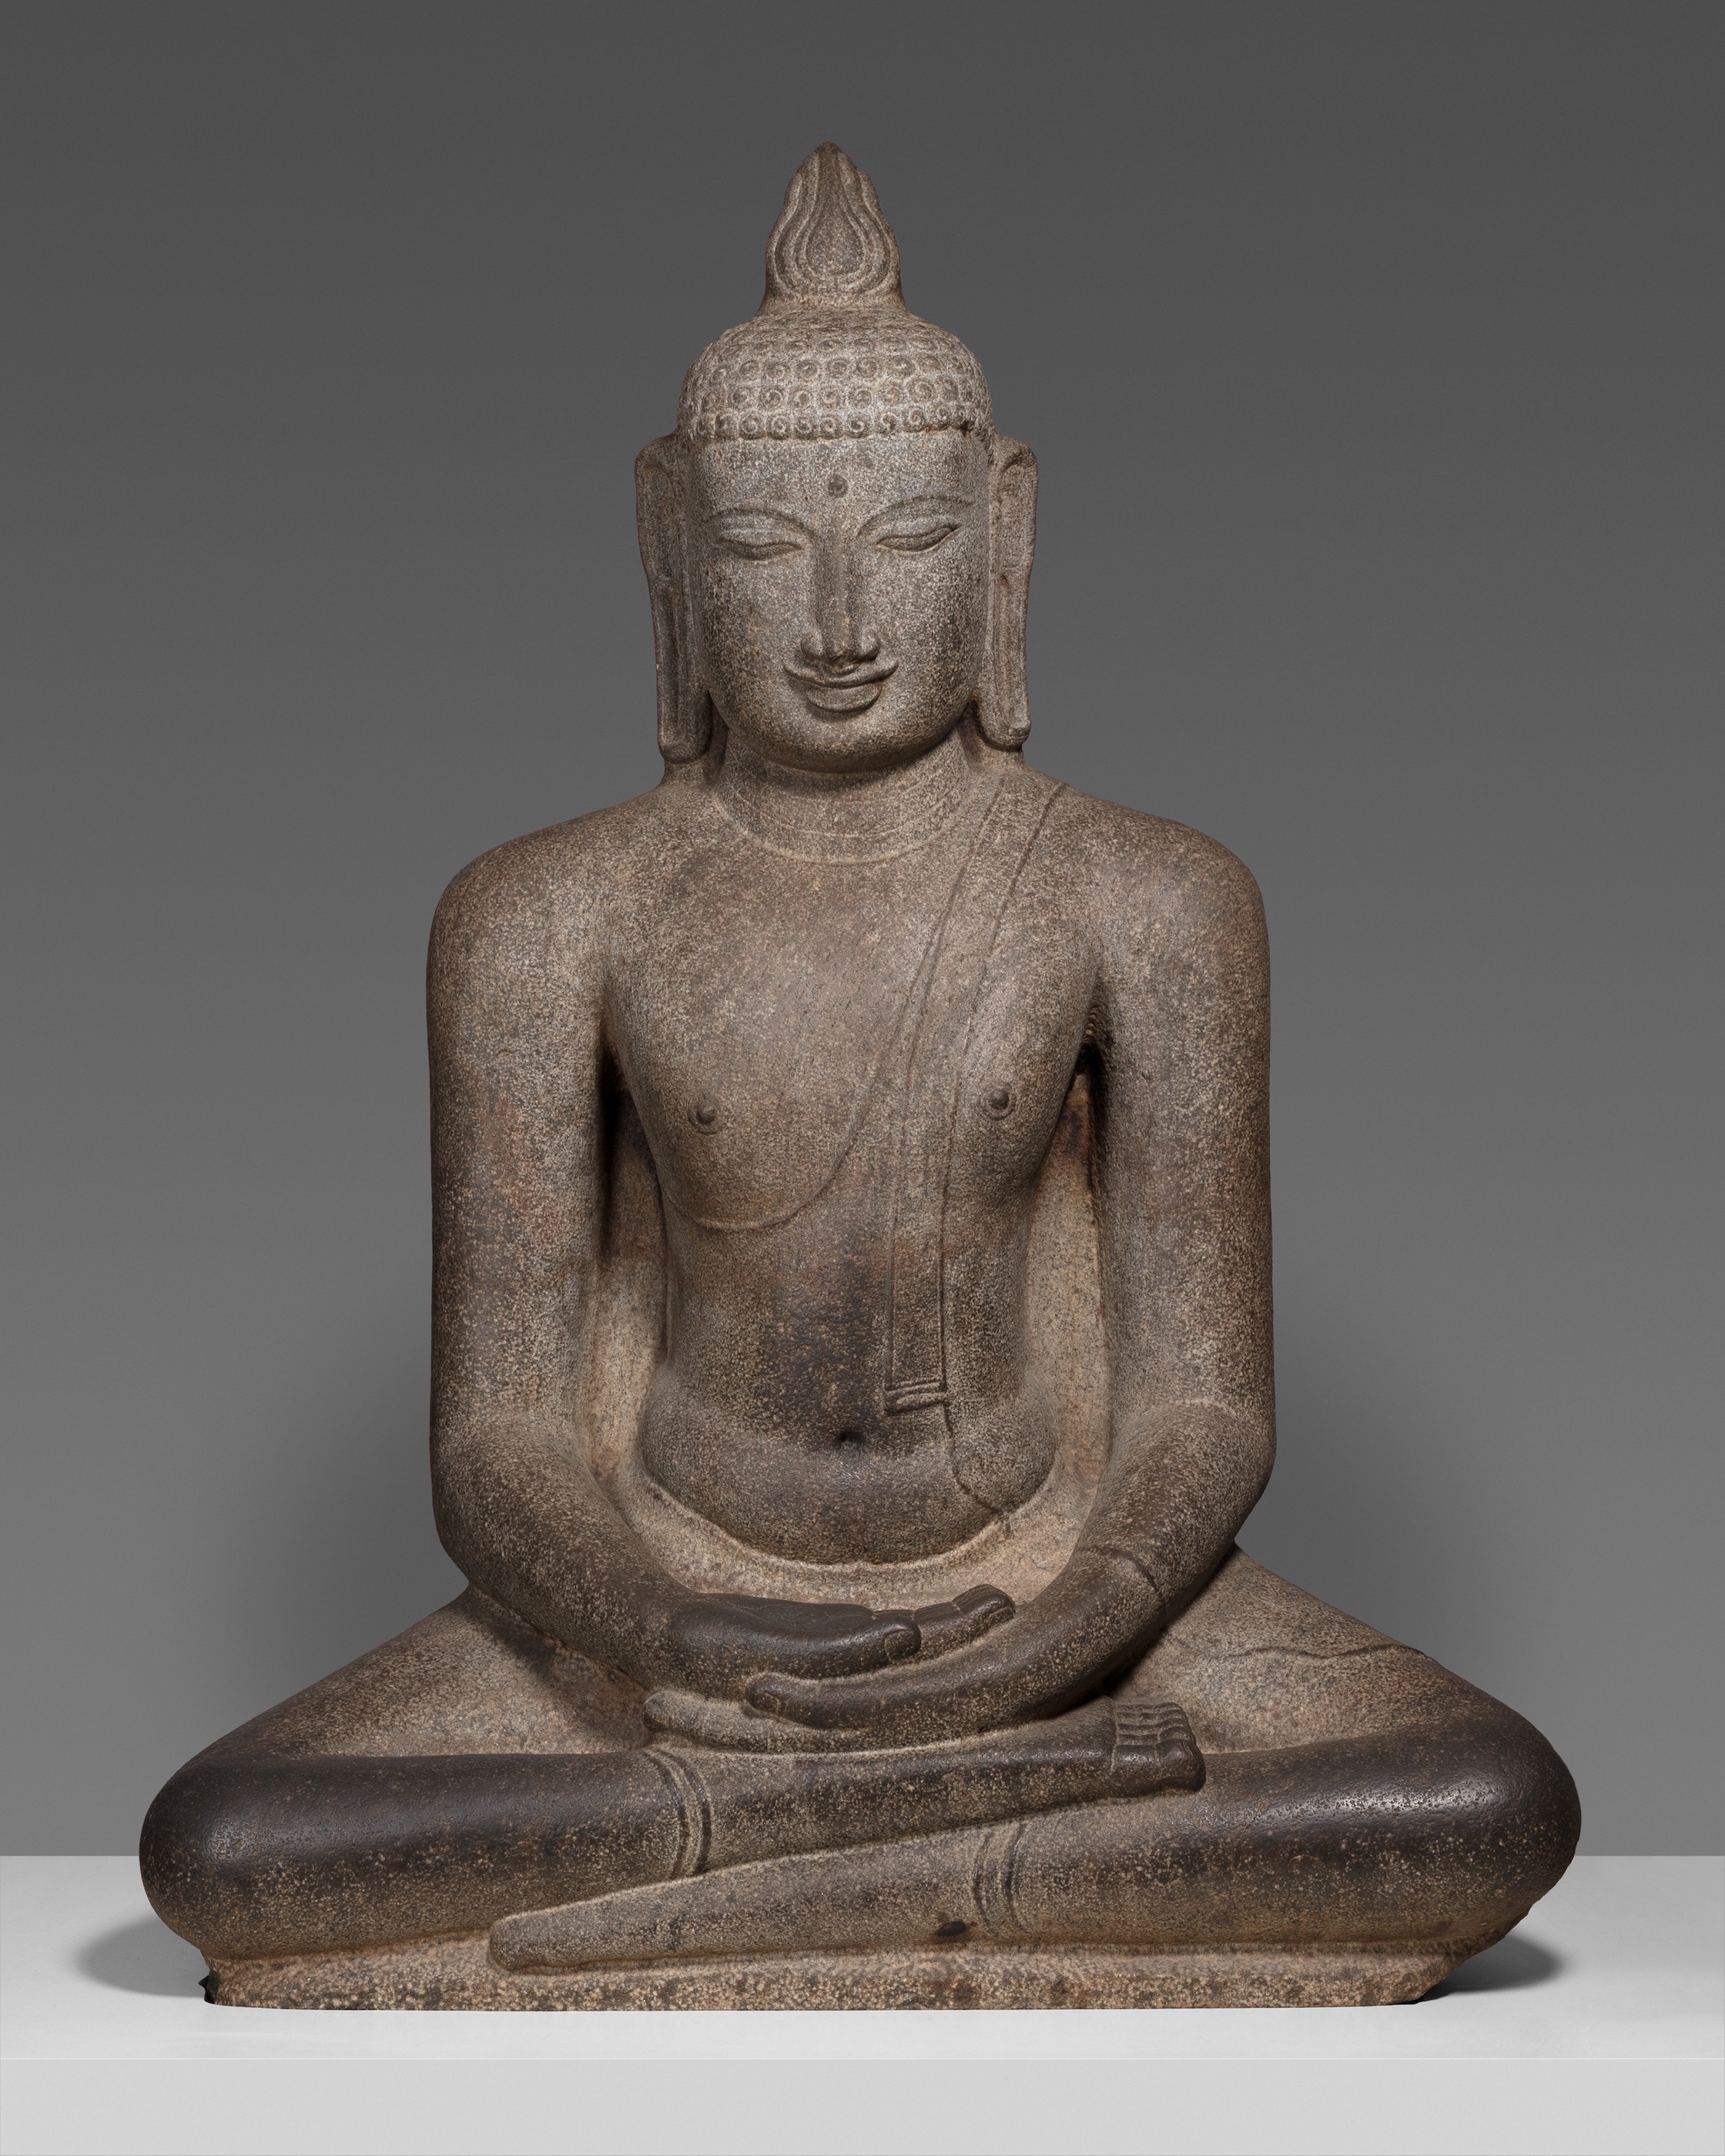 Buddha Shakyamuni Seated in Meditation (Dhyanamudra) by Unknown Artist - about 12th century - 160 × 120.2 × 56.3 cm Art Institute of Chicago